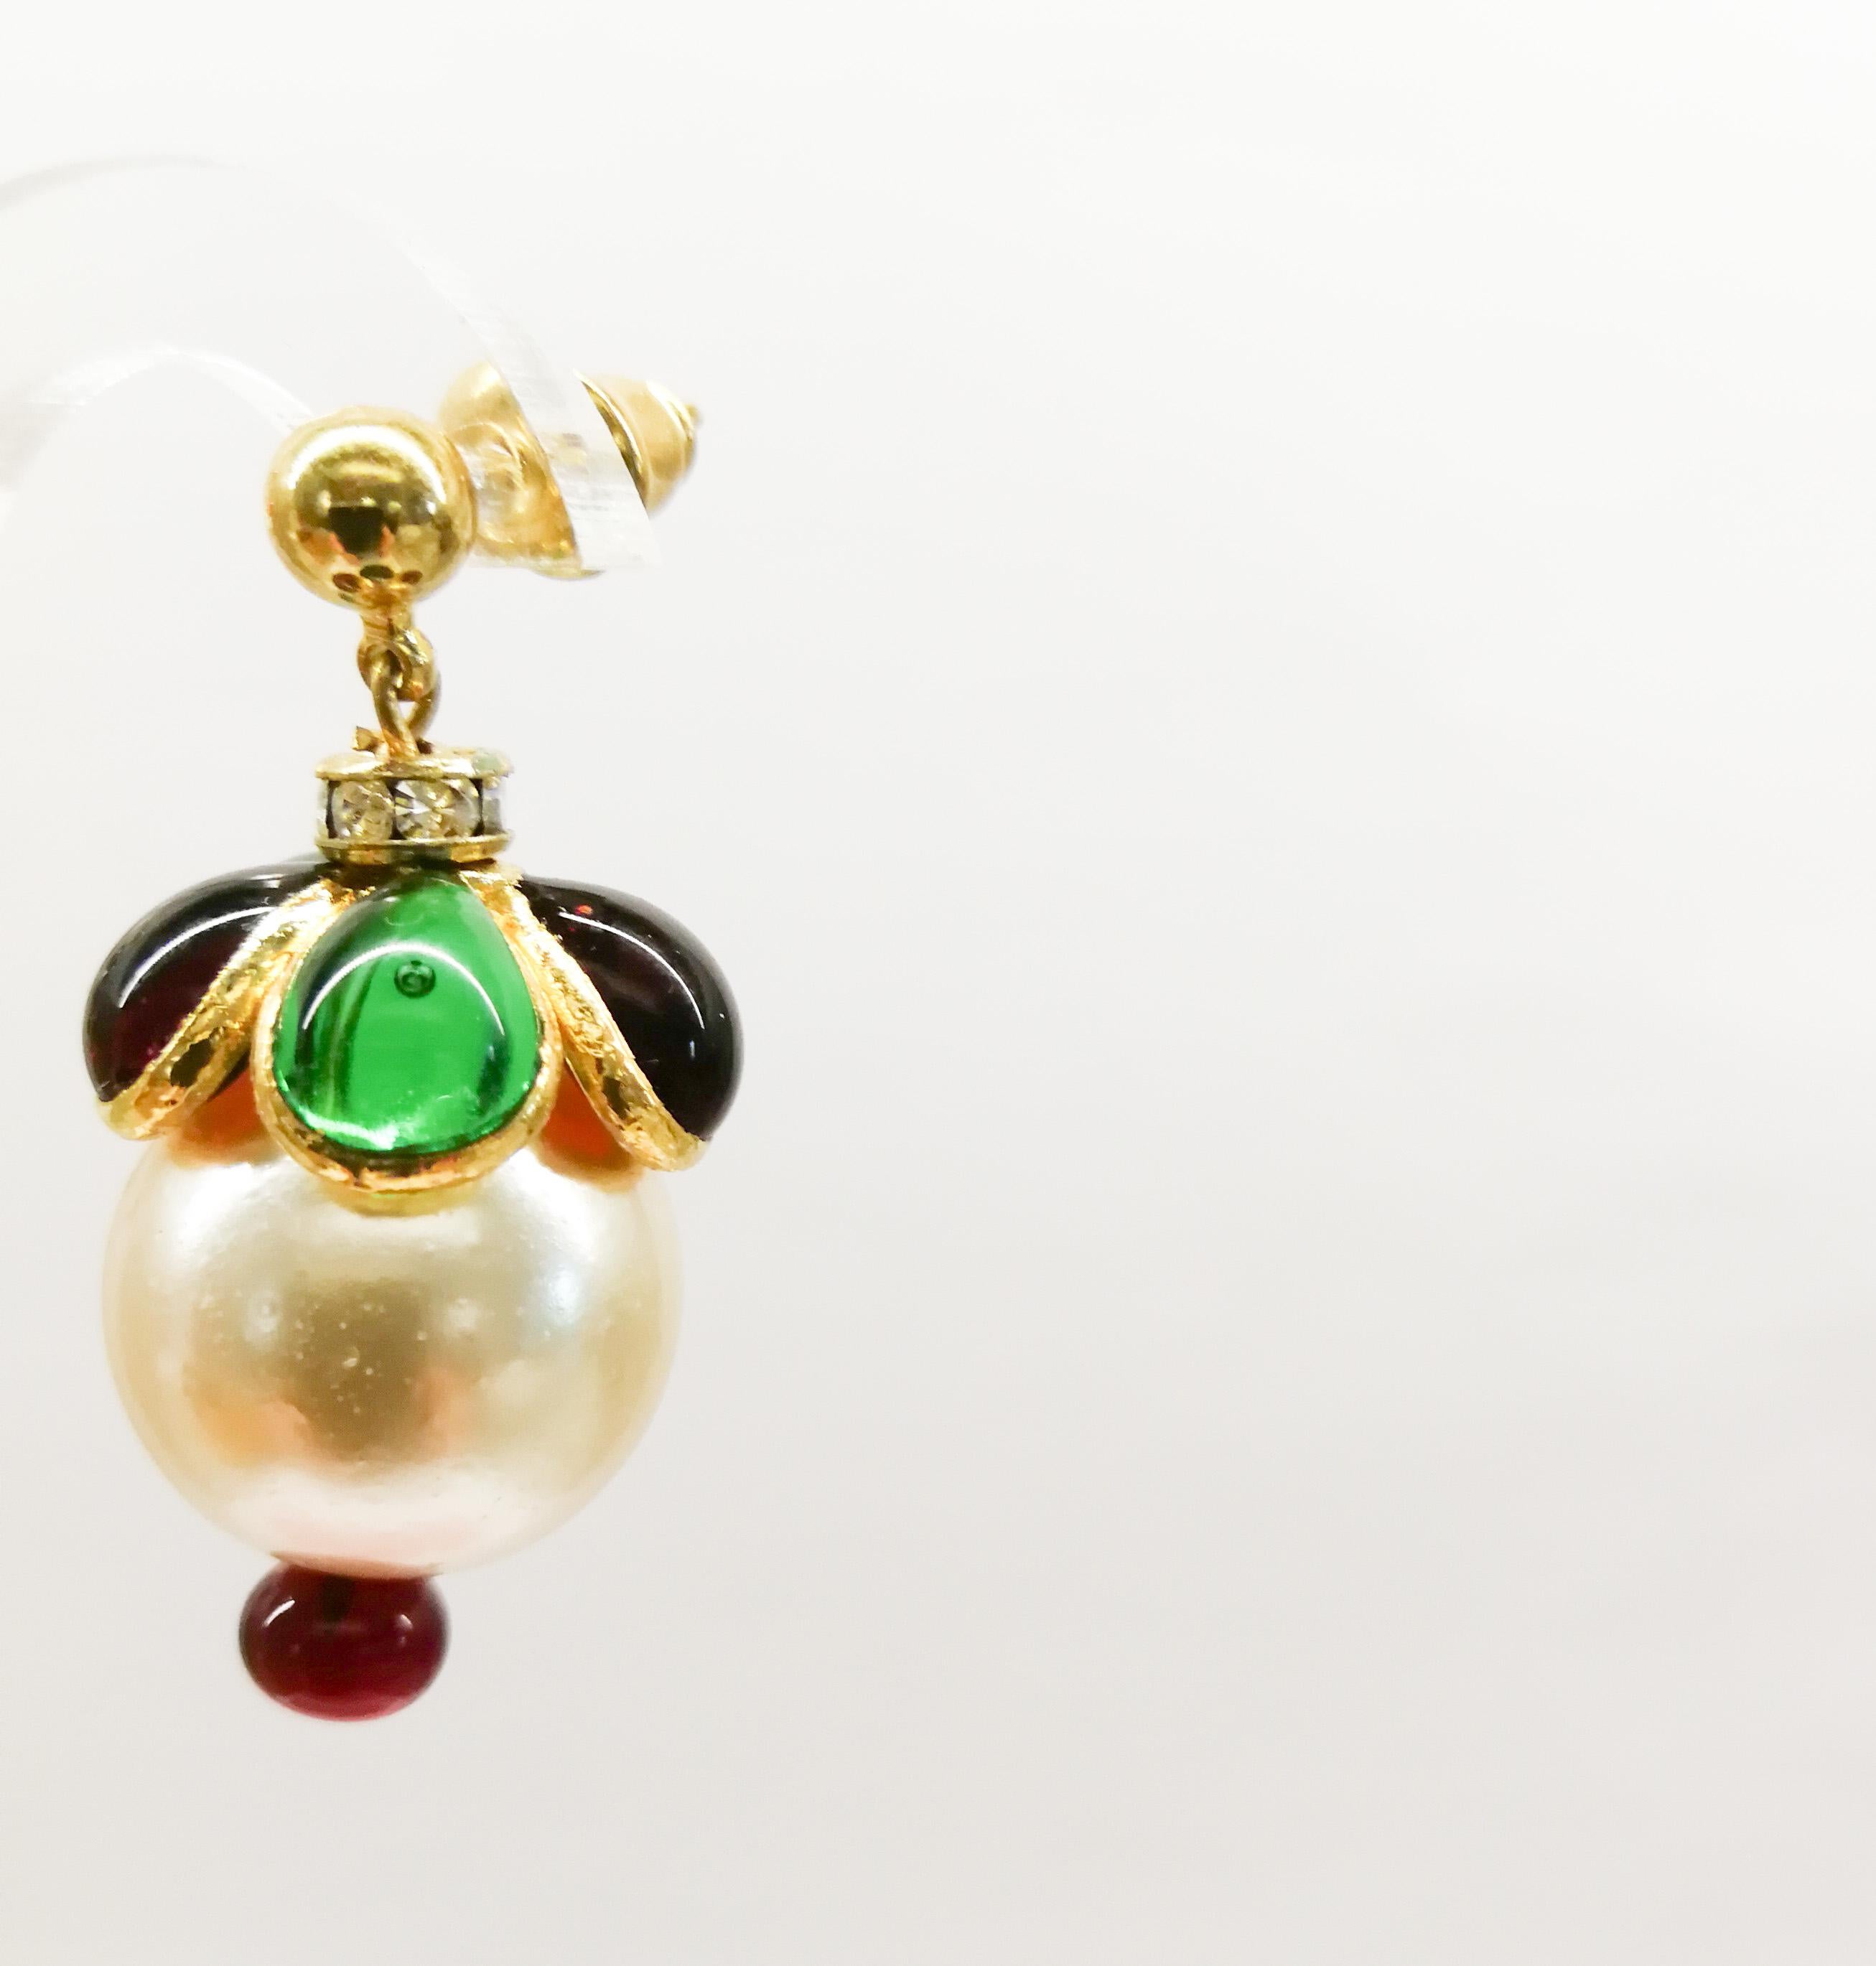 Women's 'WW' Collection poured glass, gilt and pearl drop 'Harlequin' earrings, 2019.